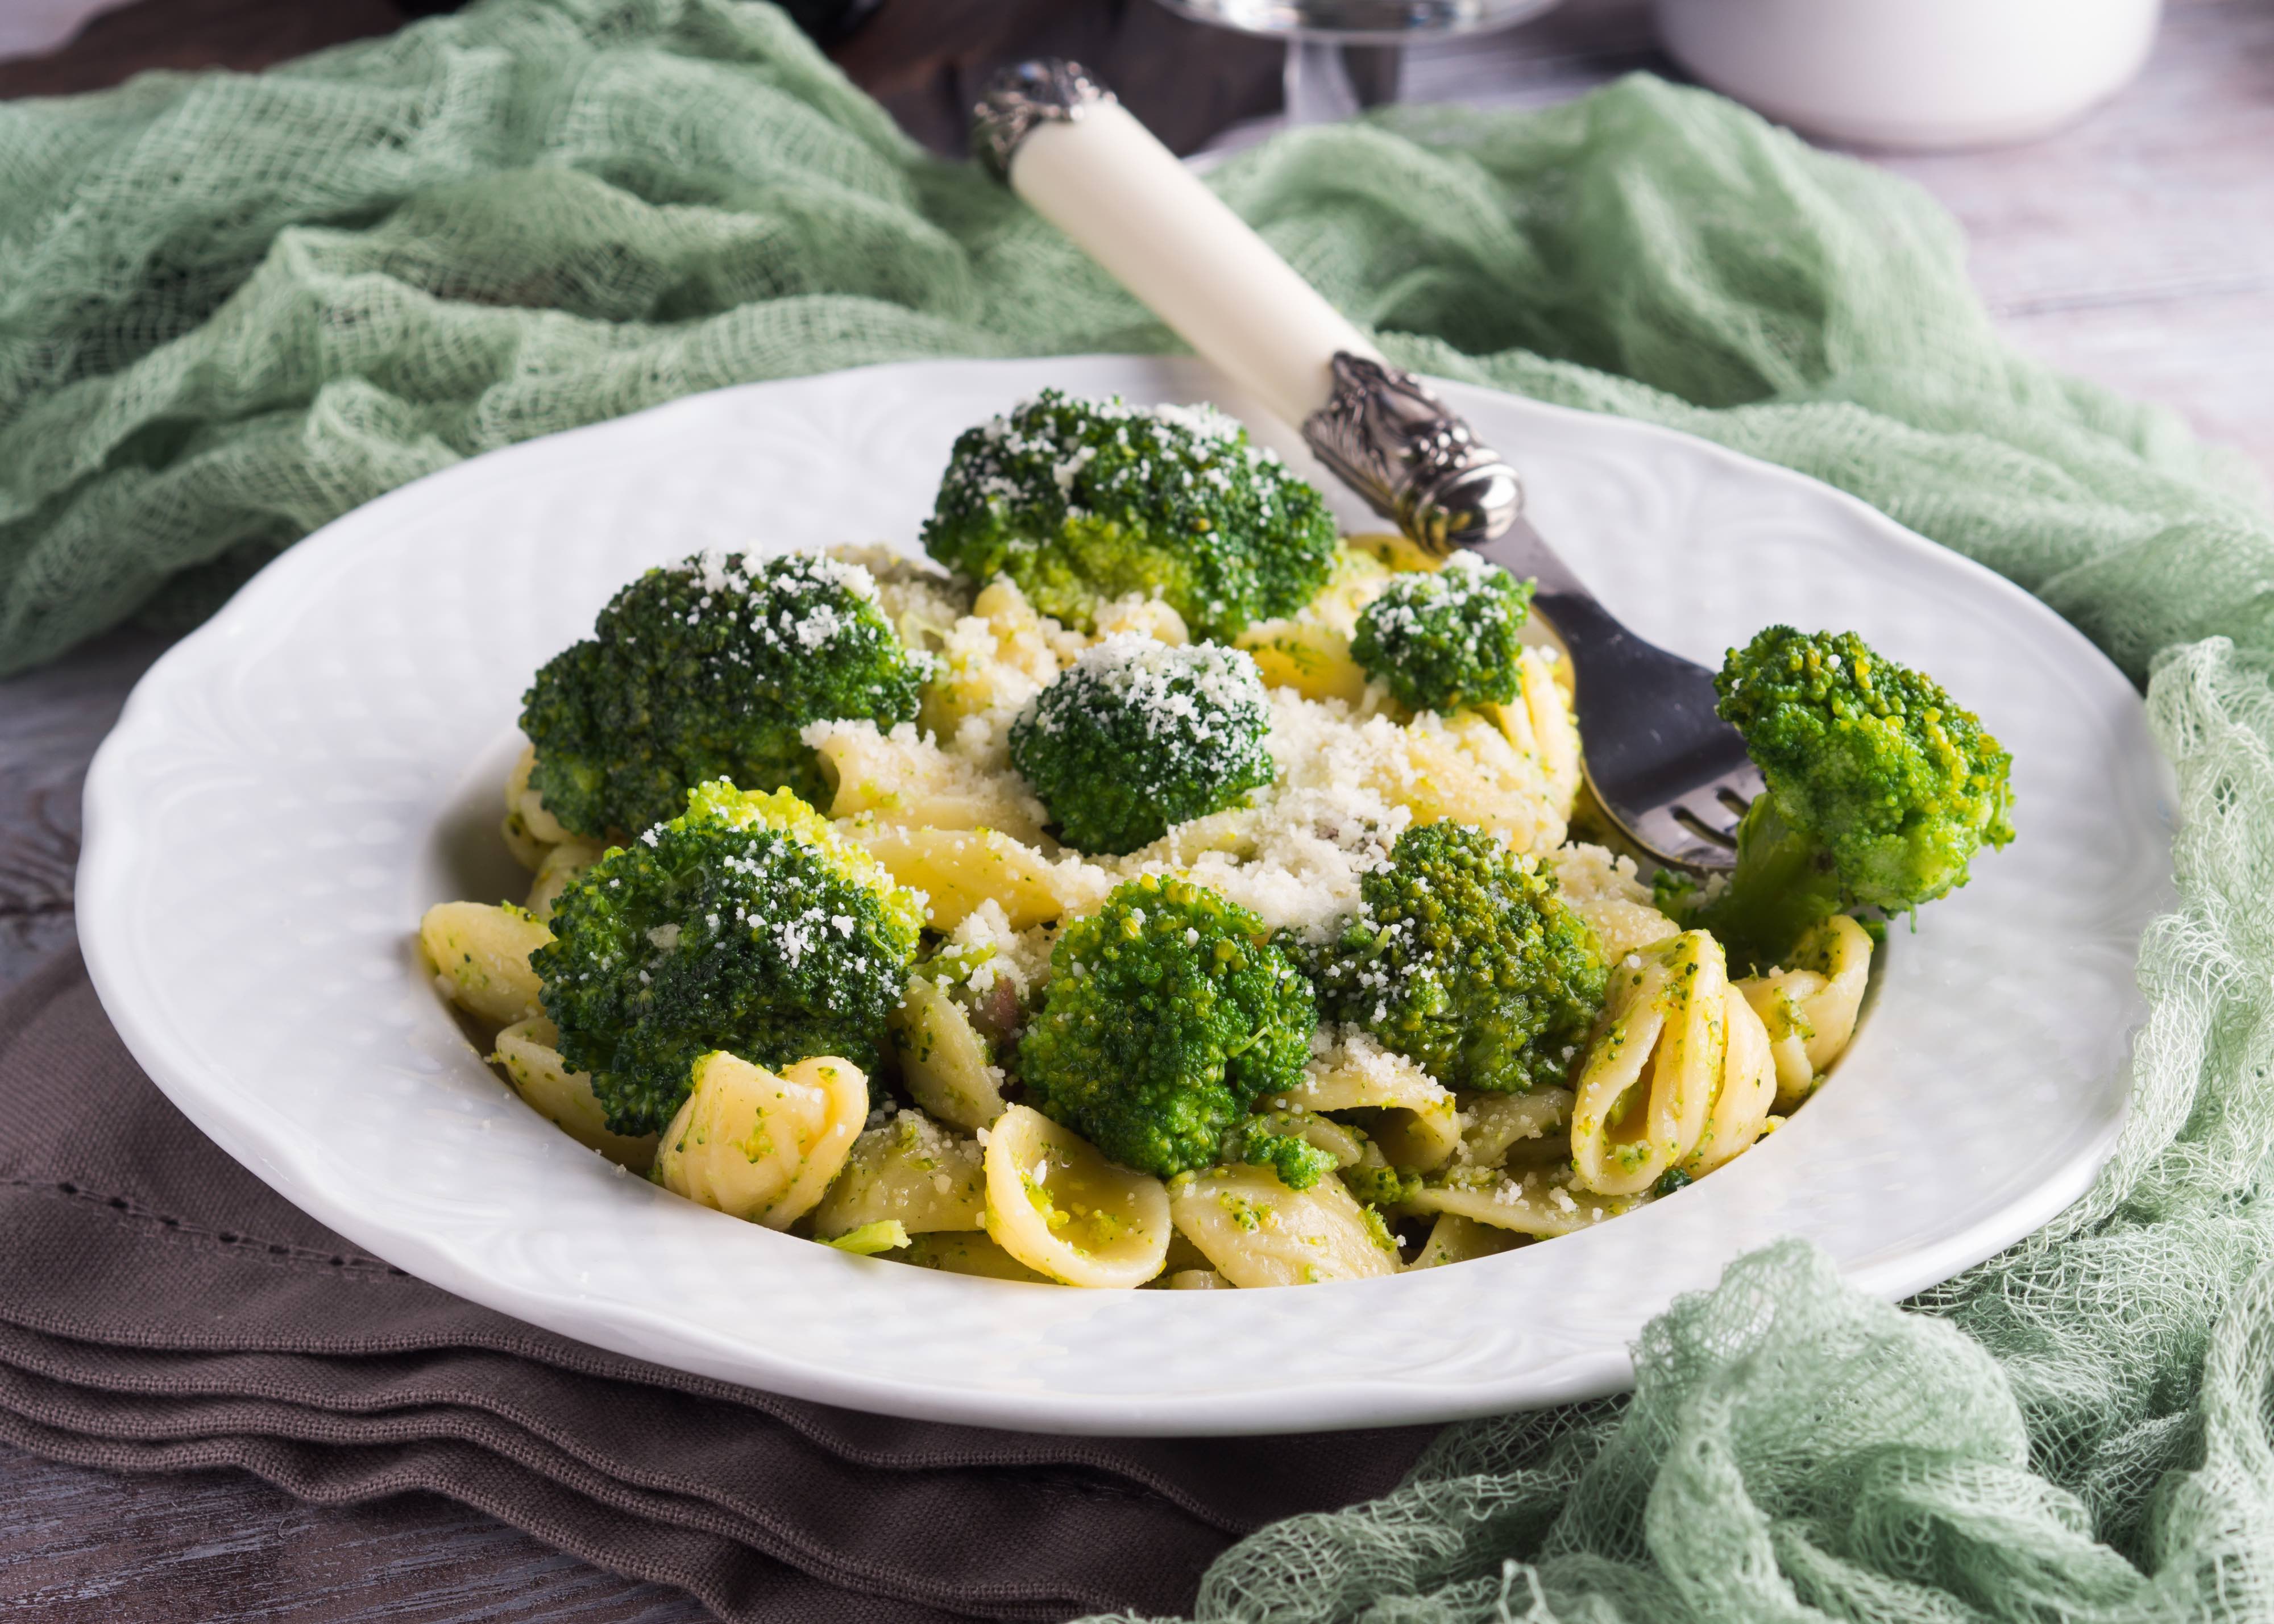 Chicken, broccoli, and shell pasta sprinkled with grated parmesan plated